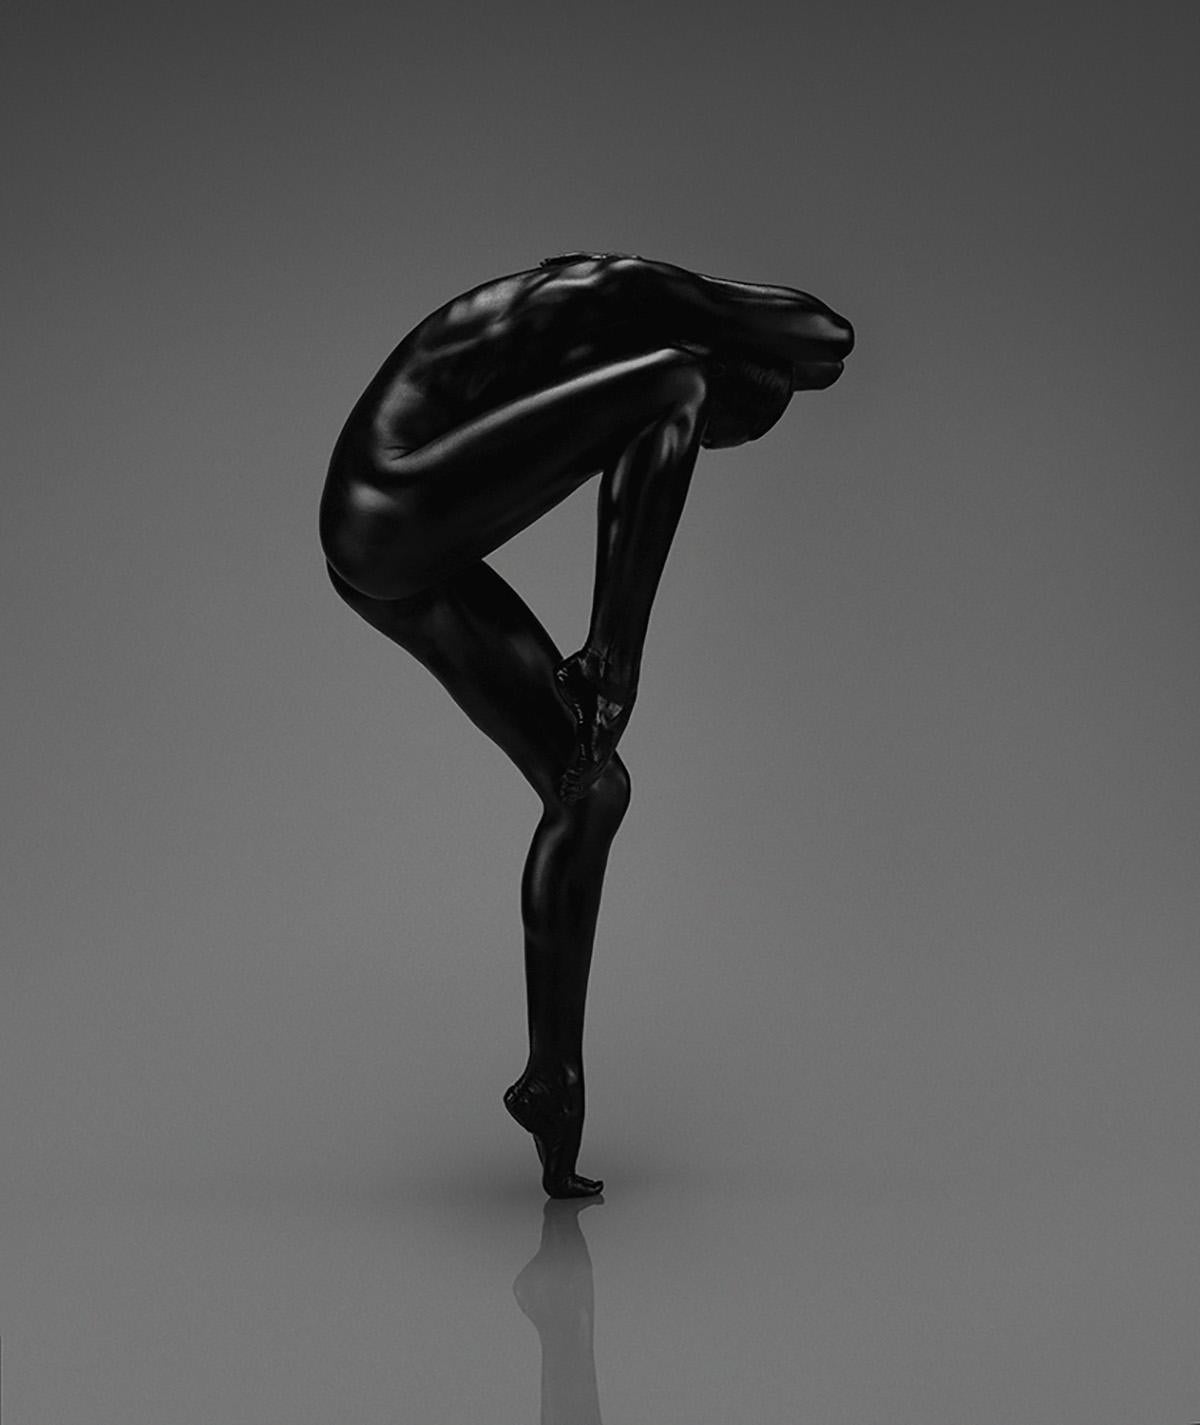 No title (No 10) Photography Edition of 18 47" x 38" in by Yevgeniy Repiashenko

Year photo was taken: 2015

This artwork is part of "Spirit" series.
The picture shows a frozen movement of professional ballerina. 
Special glazed black makeup is put